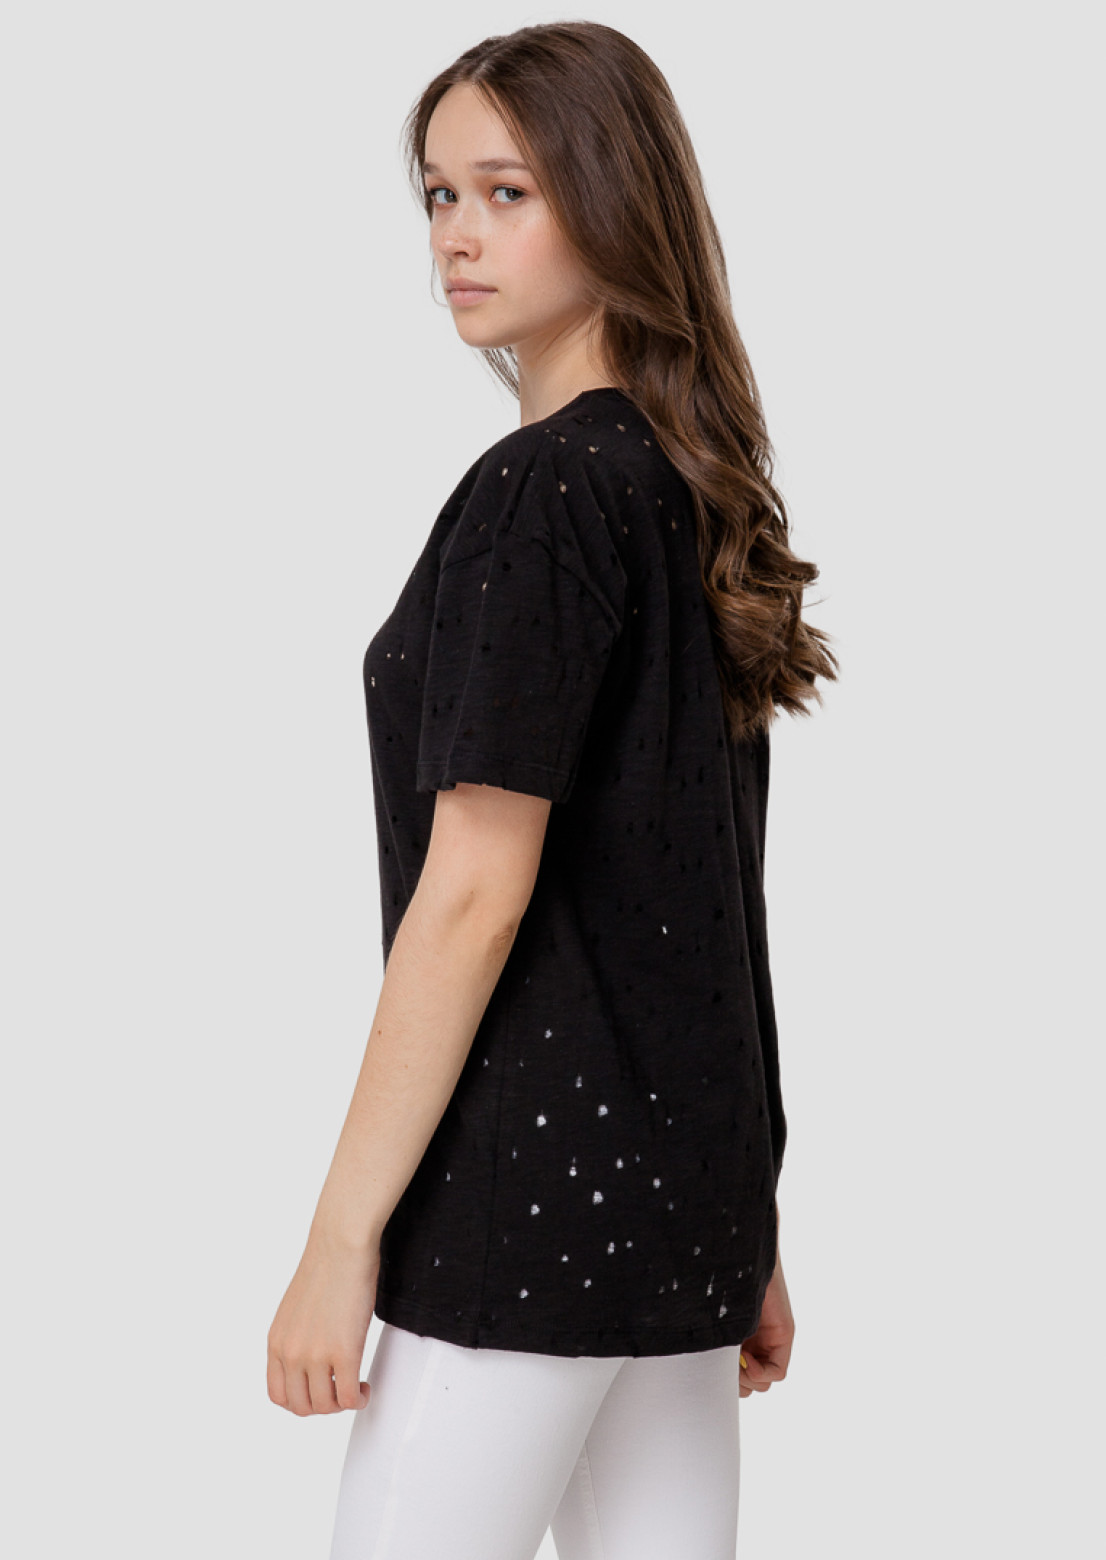 Black T-shirt with perforations